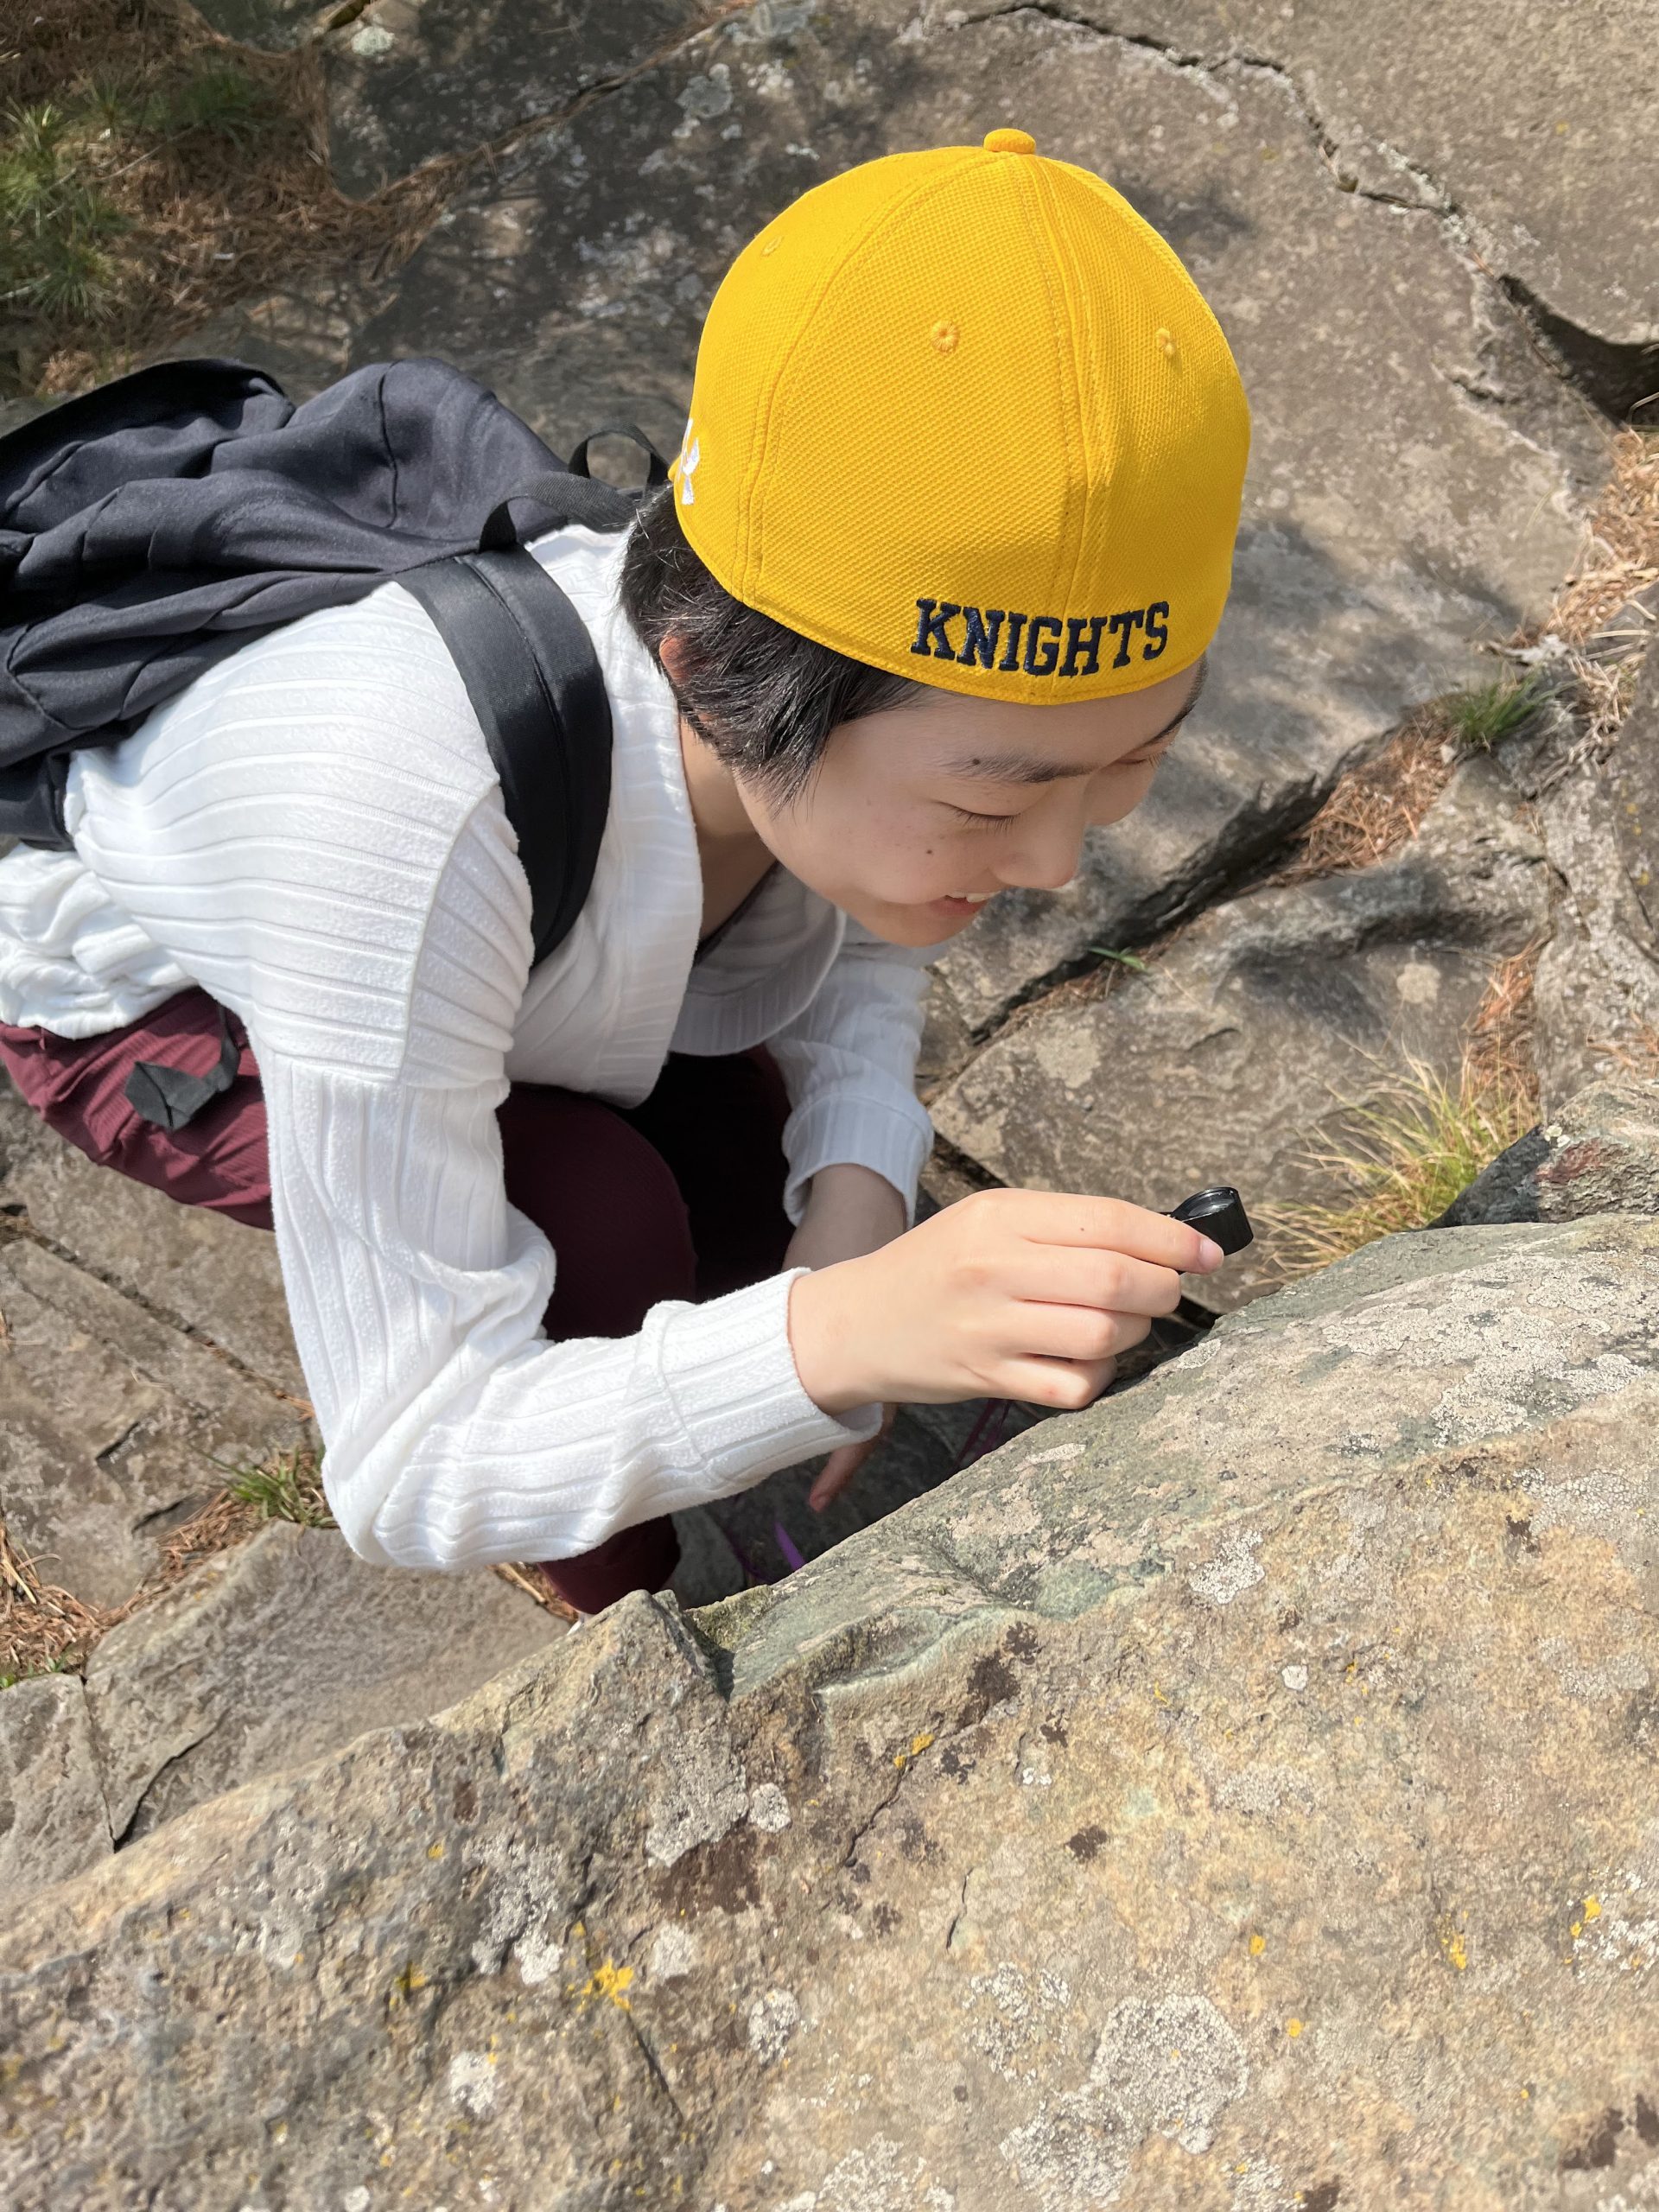 A student wearing a yellow "Knights" hat looks at a rock.